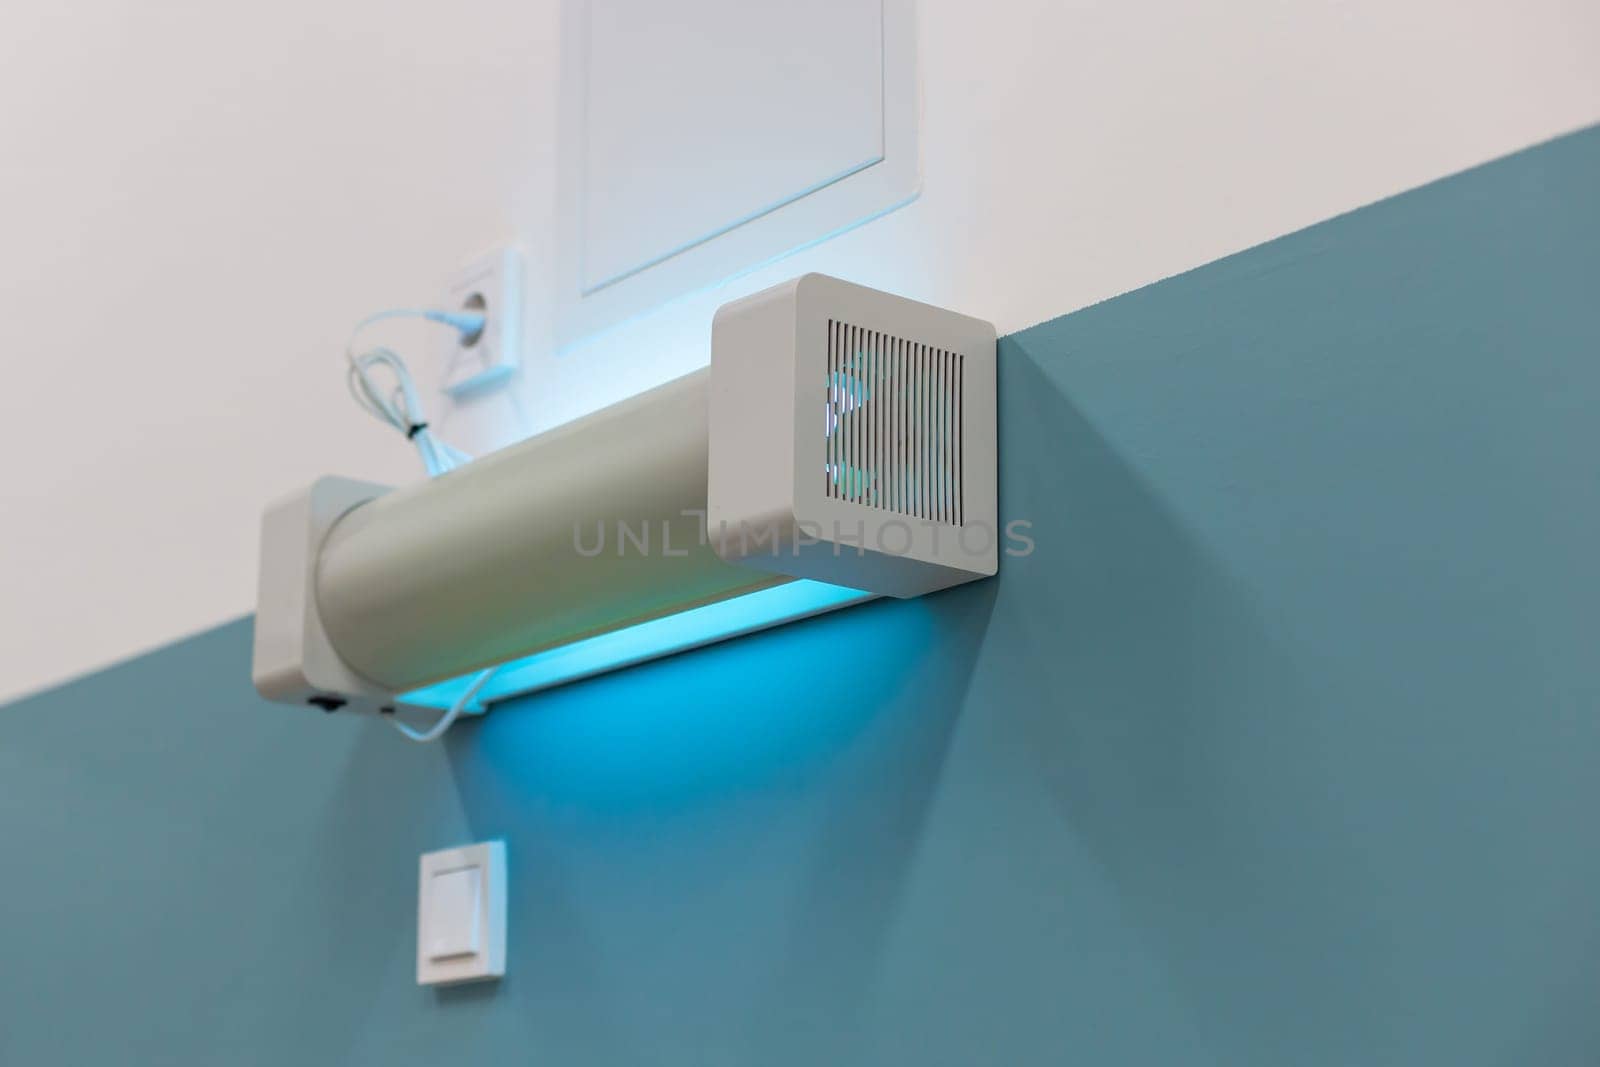 Wall-mounted UV sterilization lamp emitting blue light for disinfection in a hospital setting by Zakharova